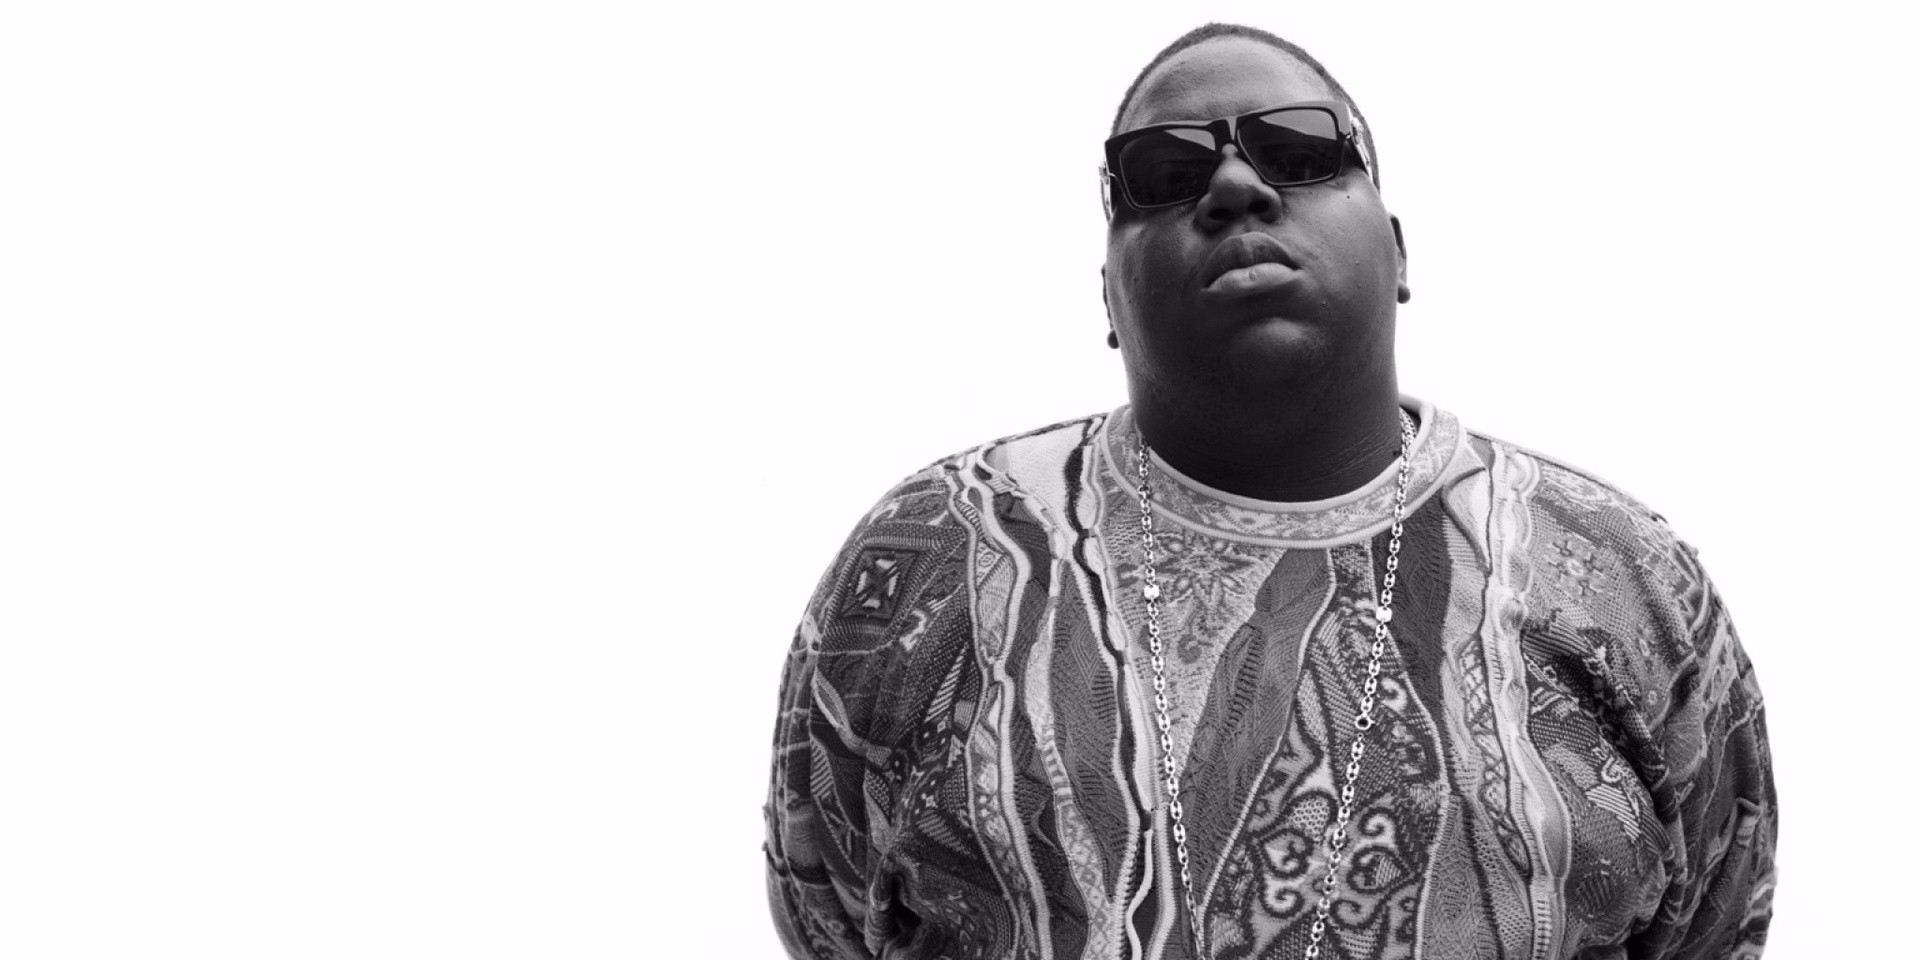 Essentials: The Notorious B.I.G.'s Ready to Die (1994), Bandwagon